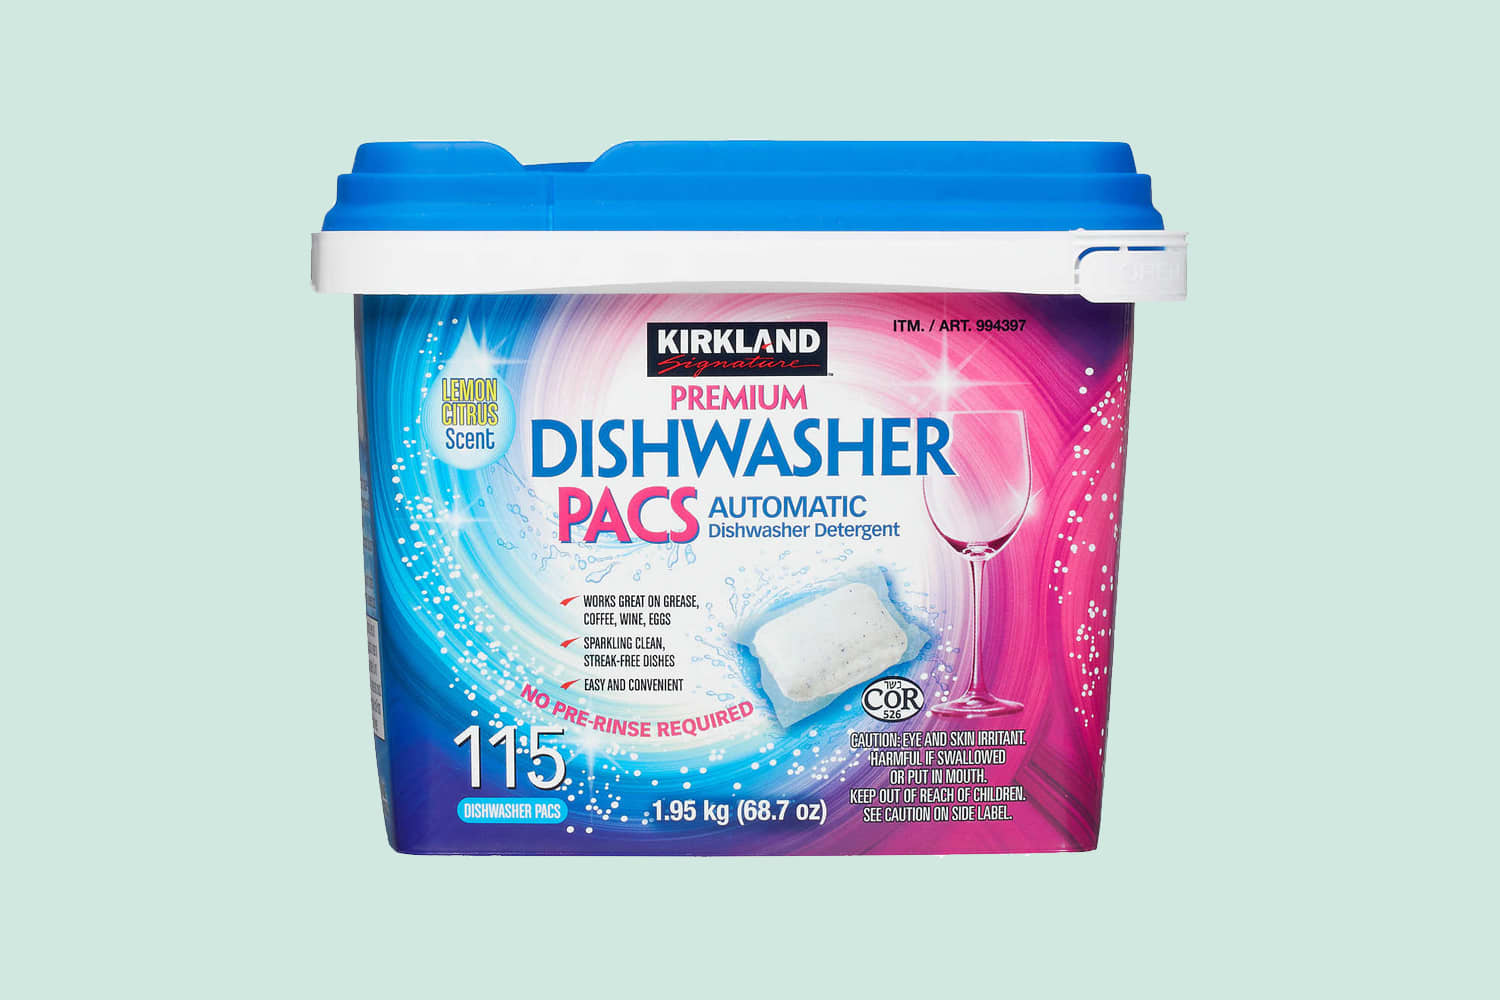 https://cdn.apartmenttherapy.info/image/upload/v1564754872/at/living/costco-cleaning-dishwasher-tablets.jpg